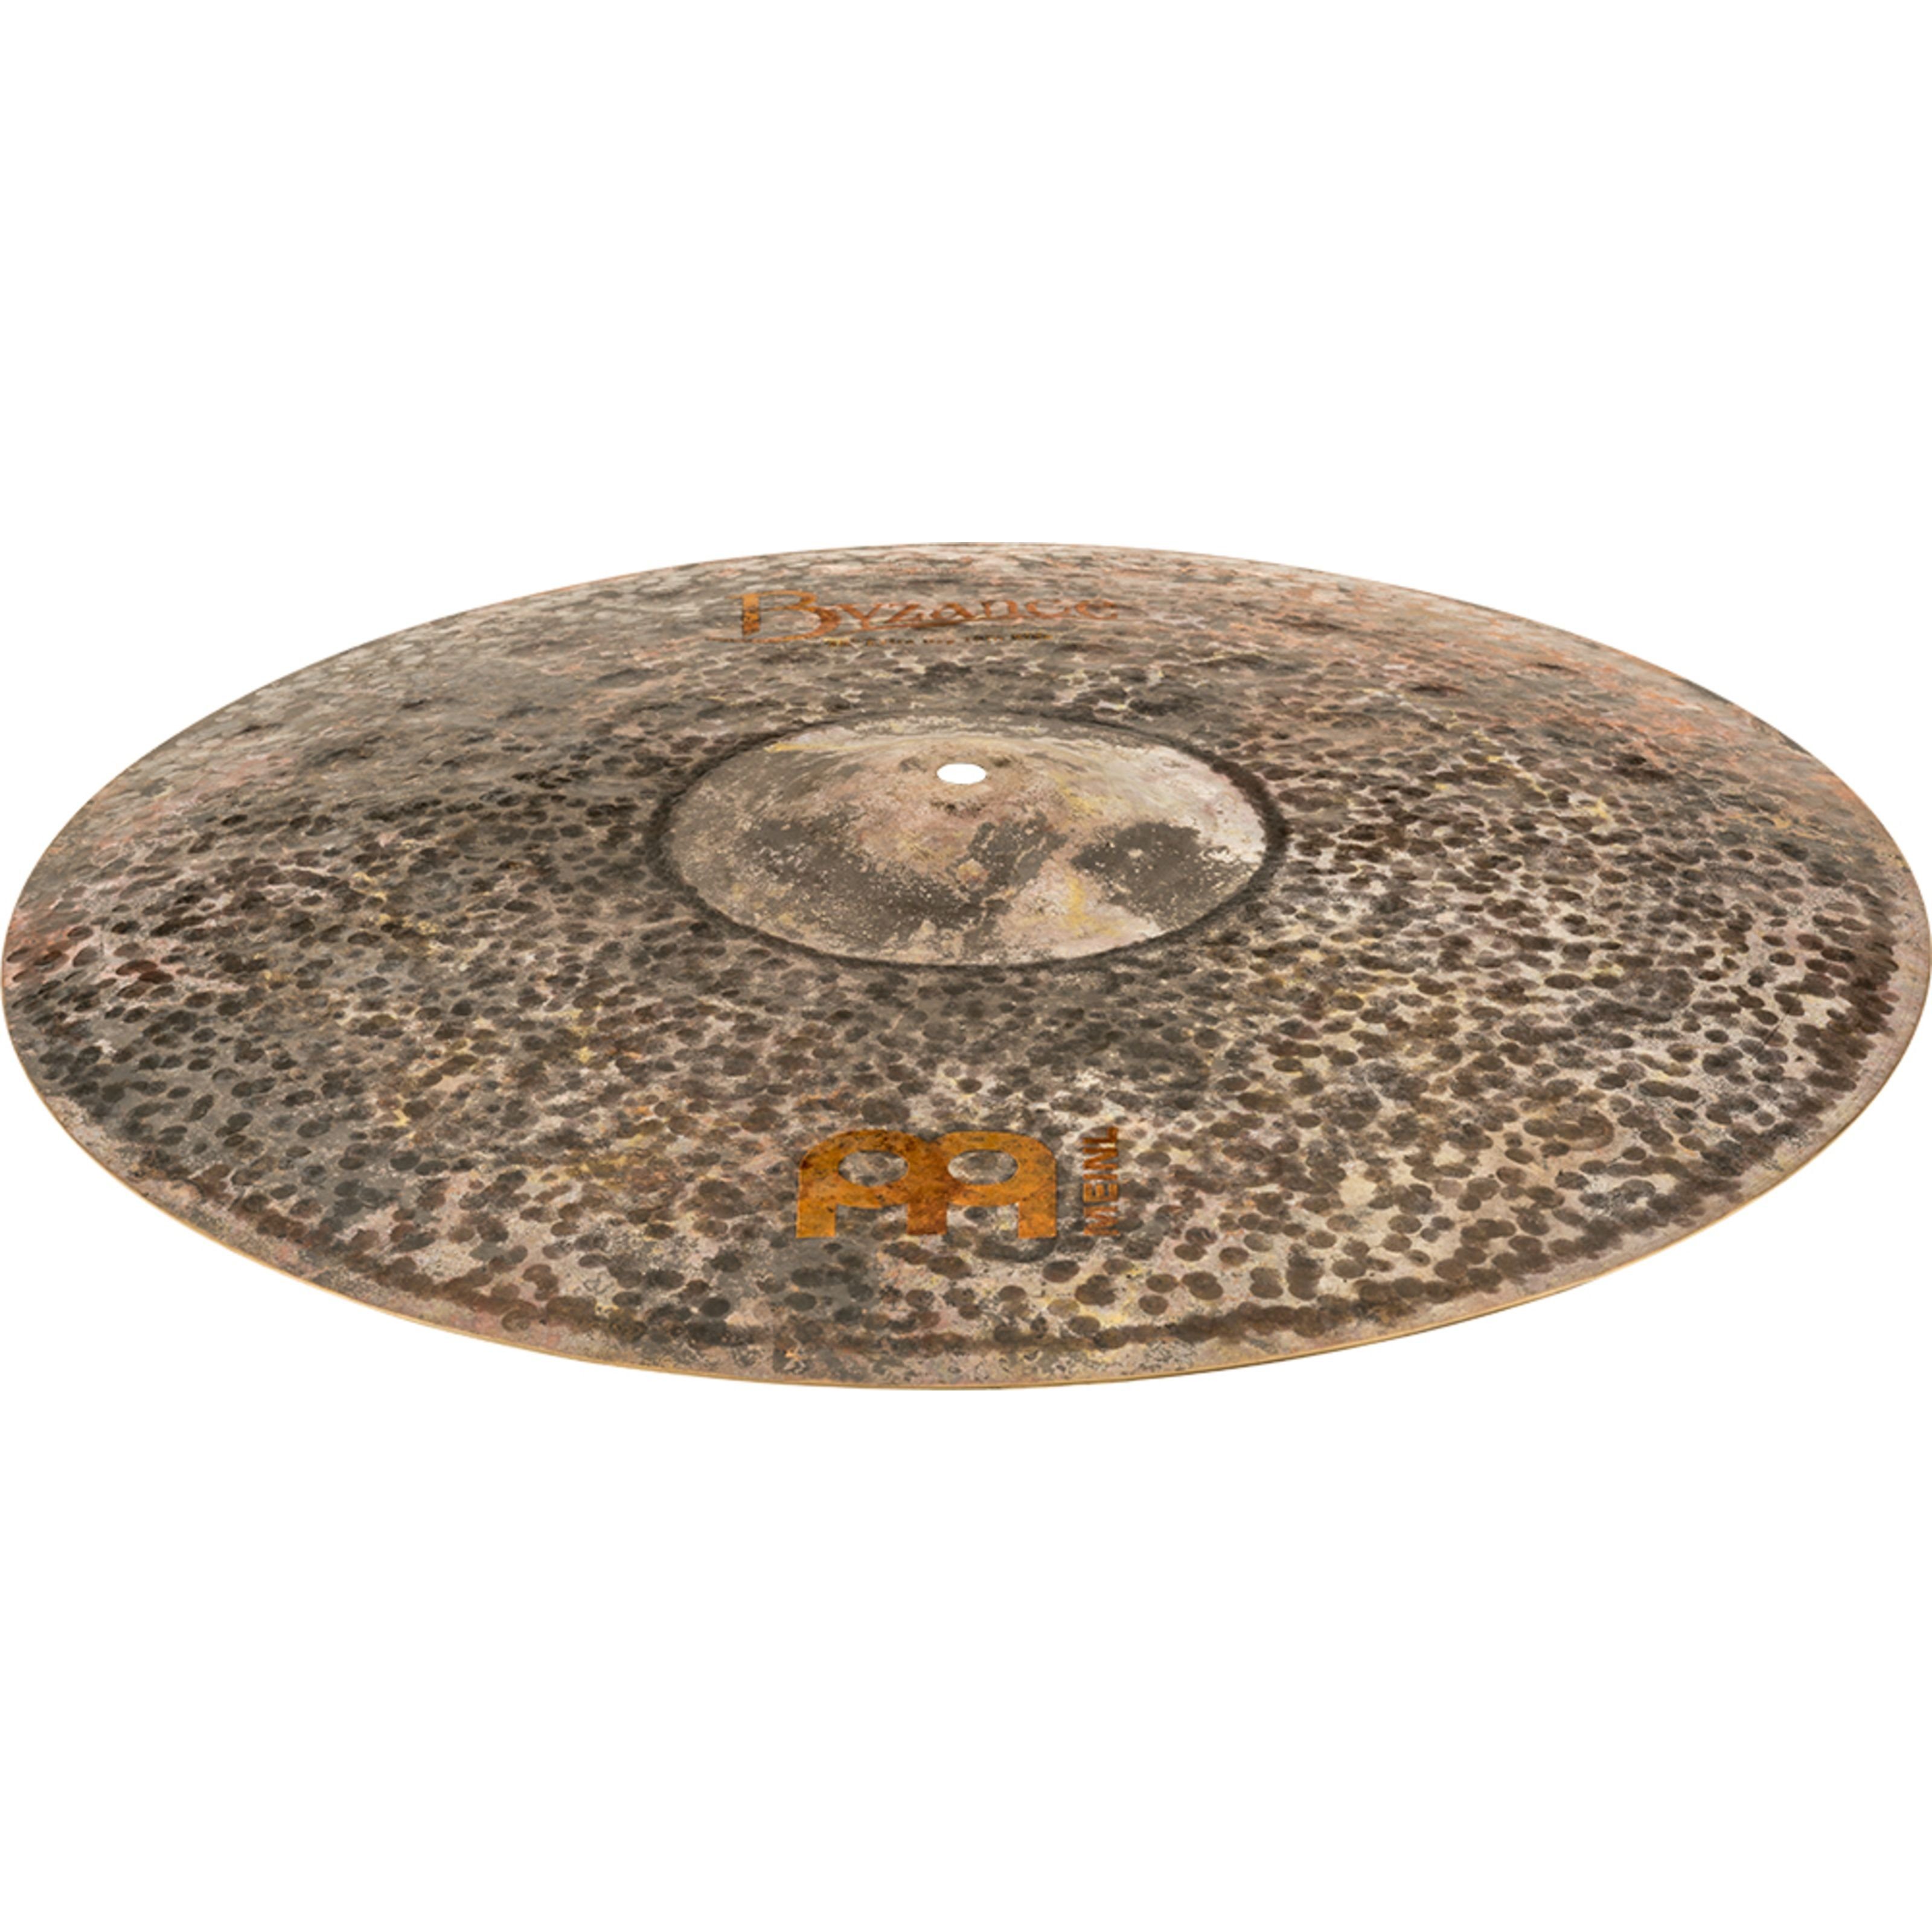 Meinl Percussion Spielzeug-Musikinstrument, Cymbal 20", Dry Byzance - Extra B20EDTR, Ride Thin Ride